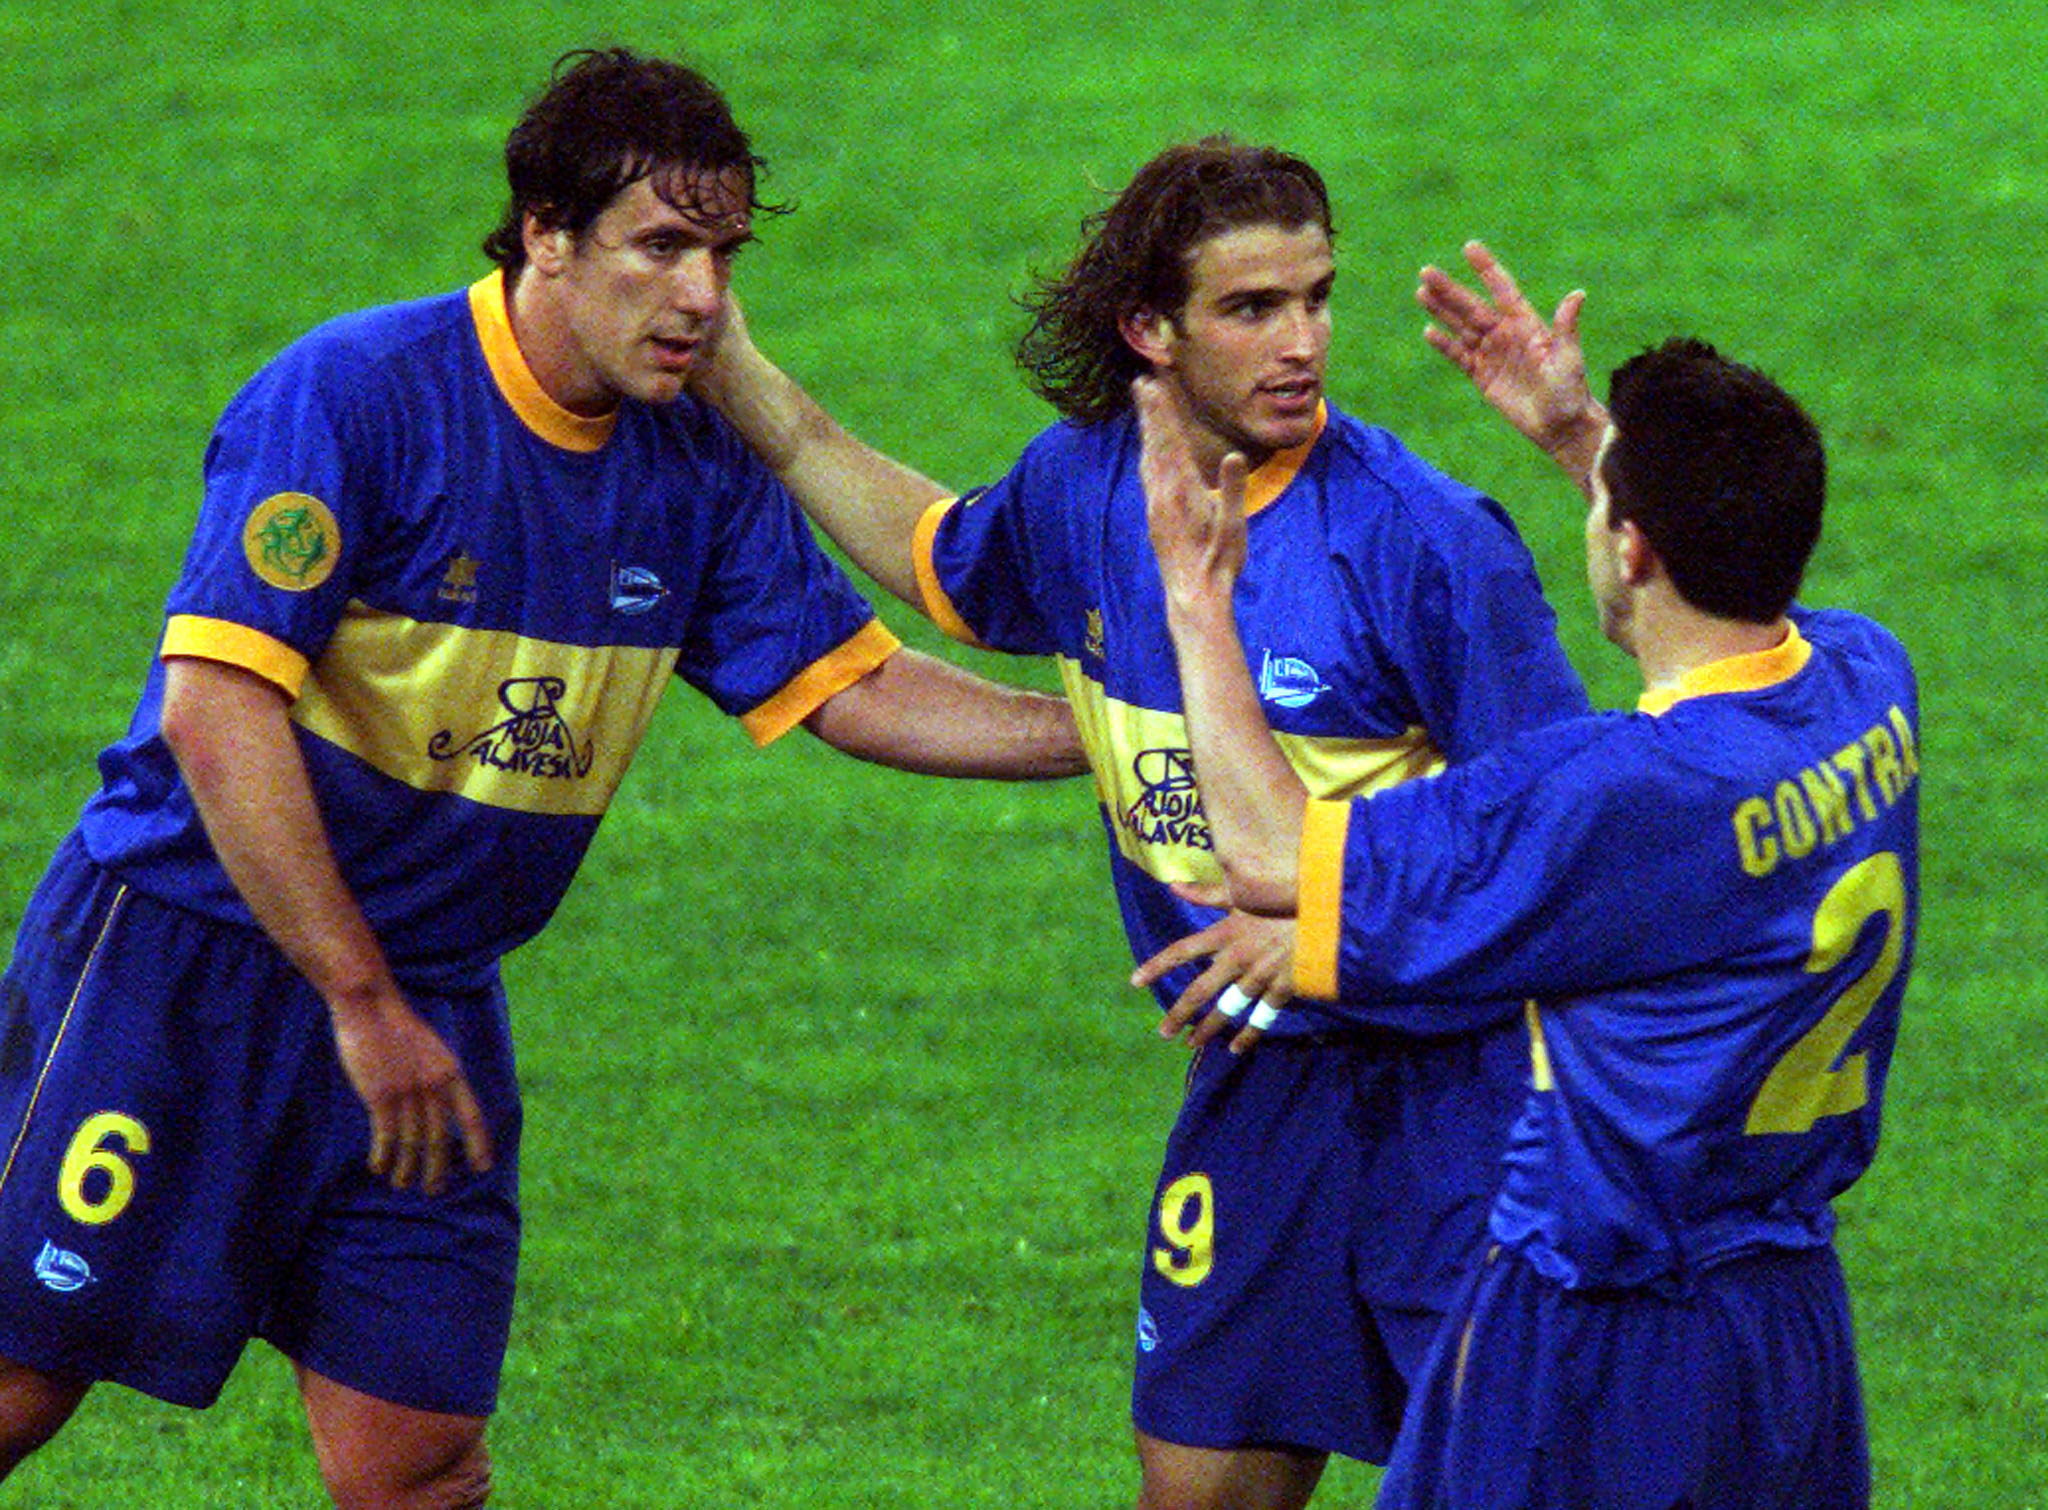 Alavés and the story of the 2001 UEFA Cup final